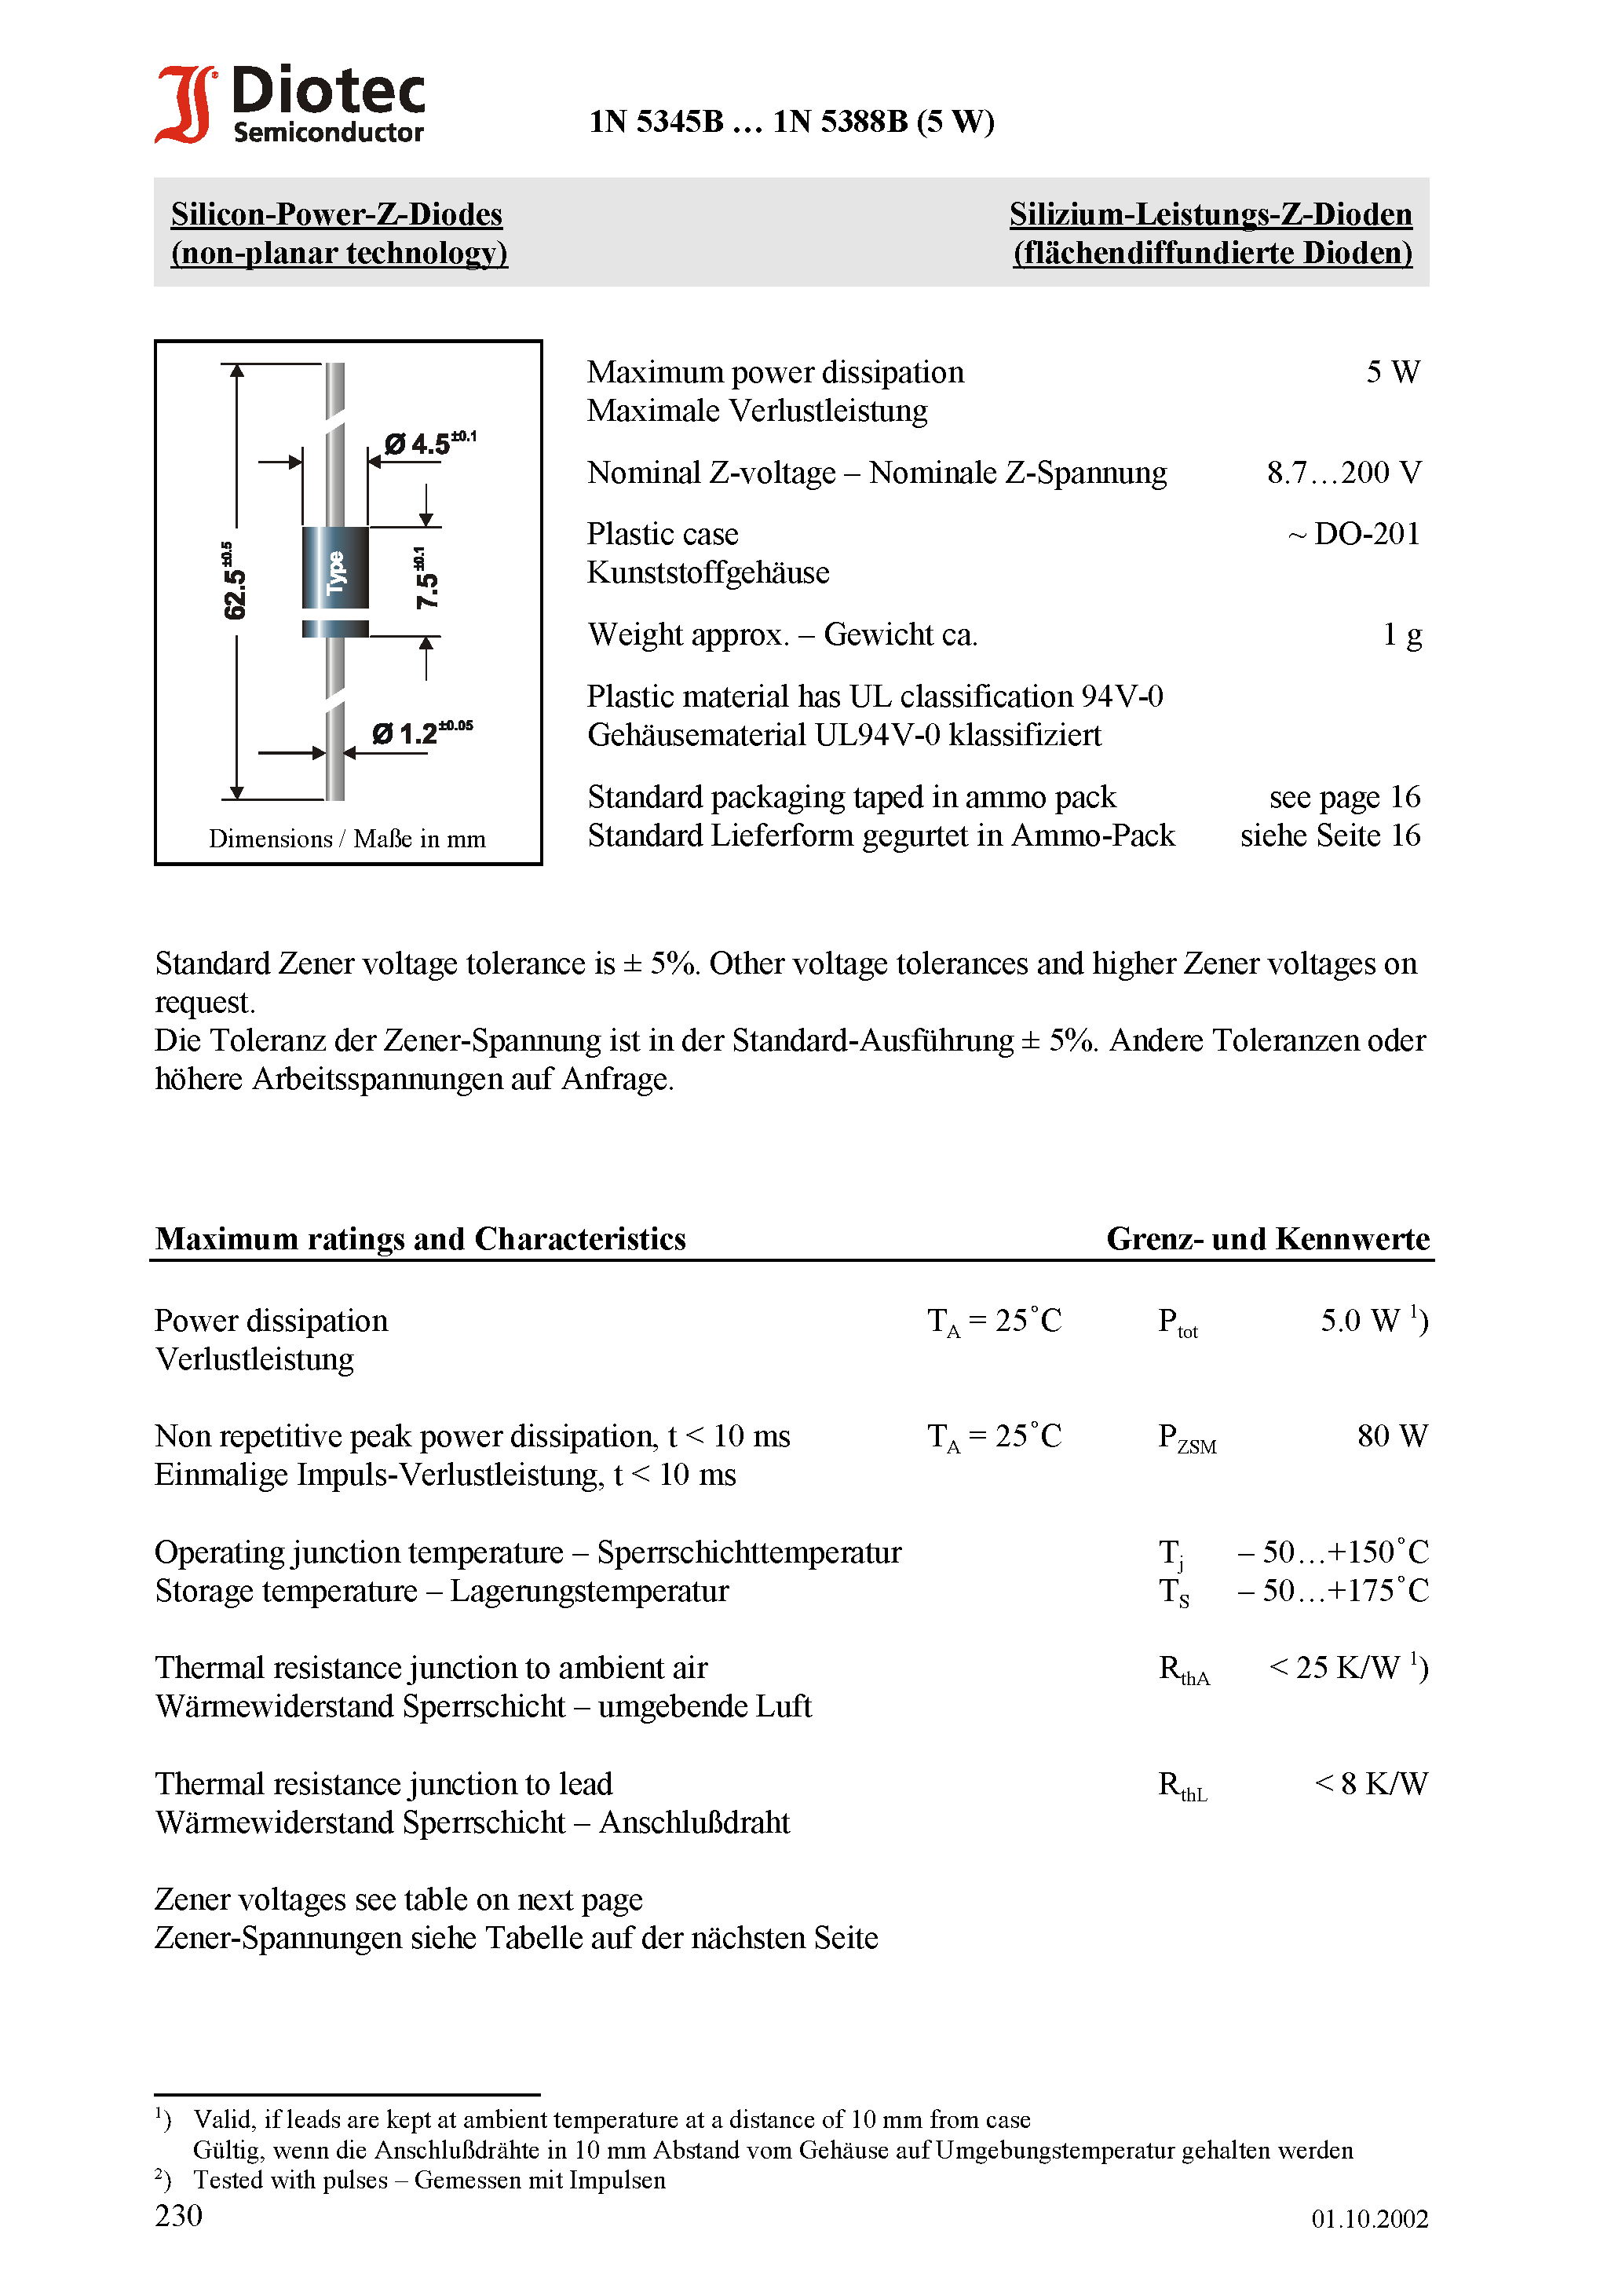 Datasheet 1N5370B - Silicon-Power-Z-Diodes (non-planar technology) page 1